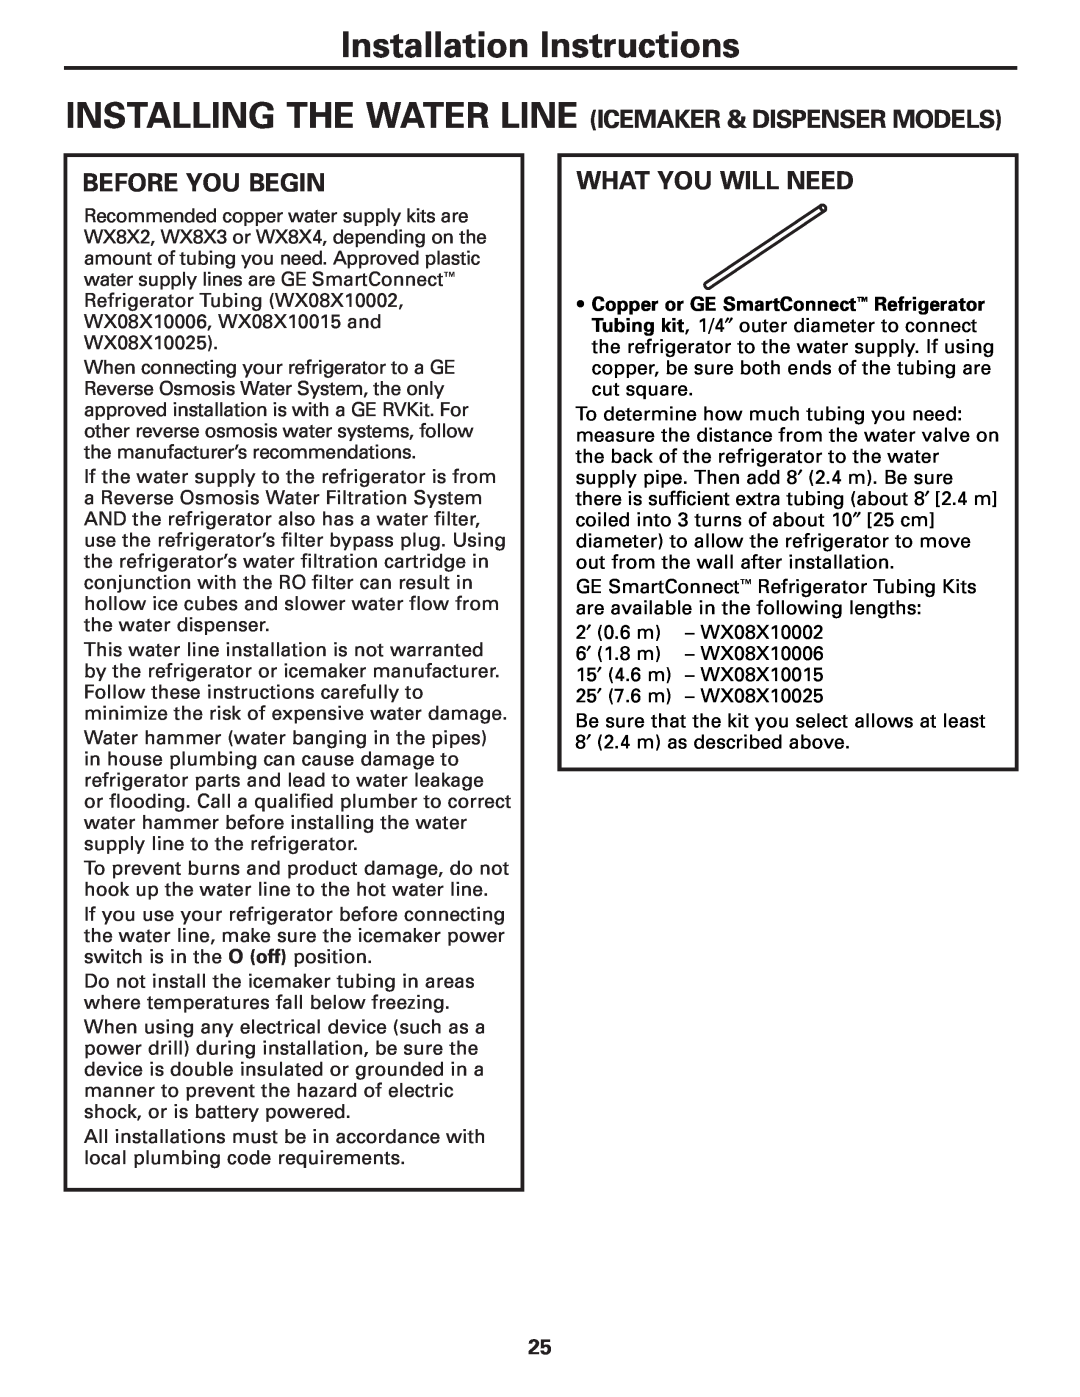 GE 25 and 27 installation instructions What You Will Need, Installation Instructions, Before You Begin 